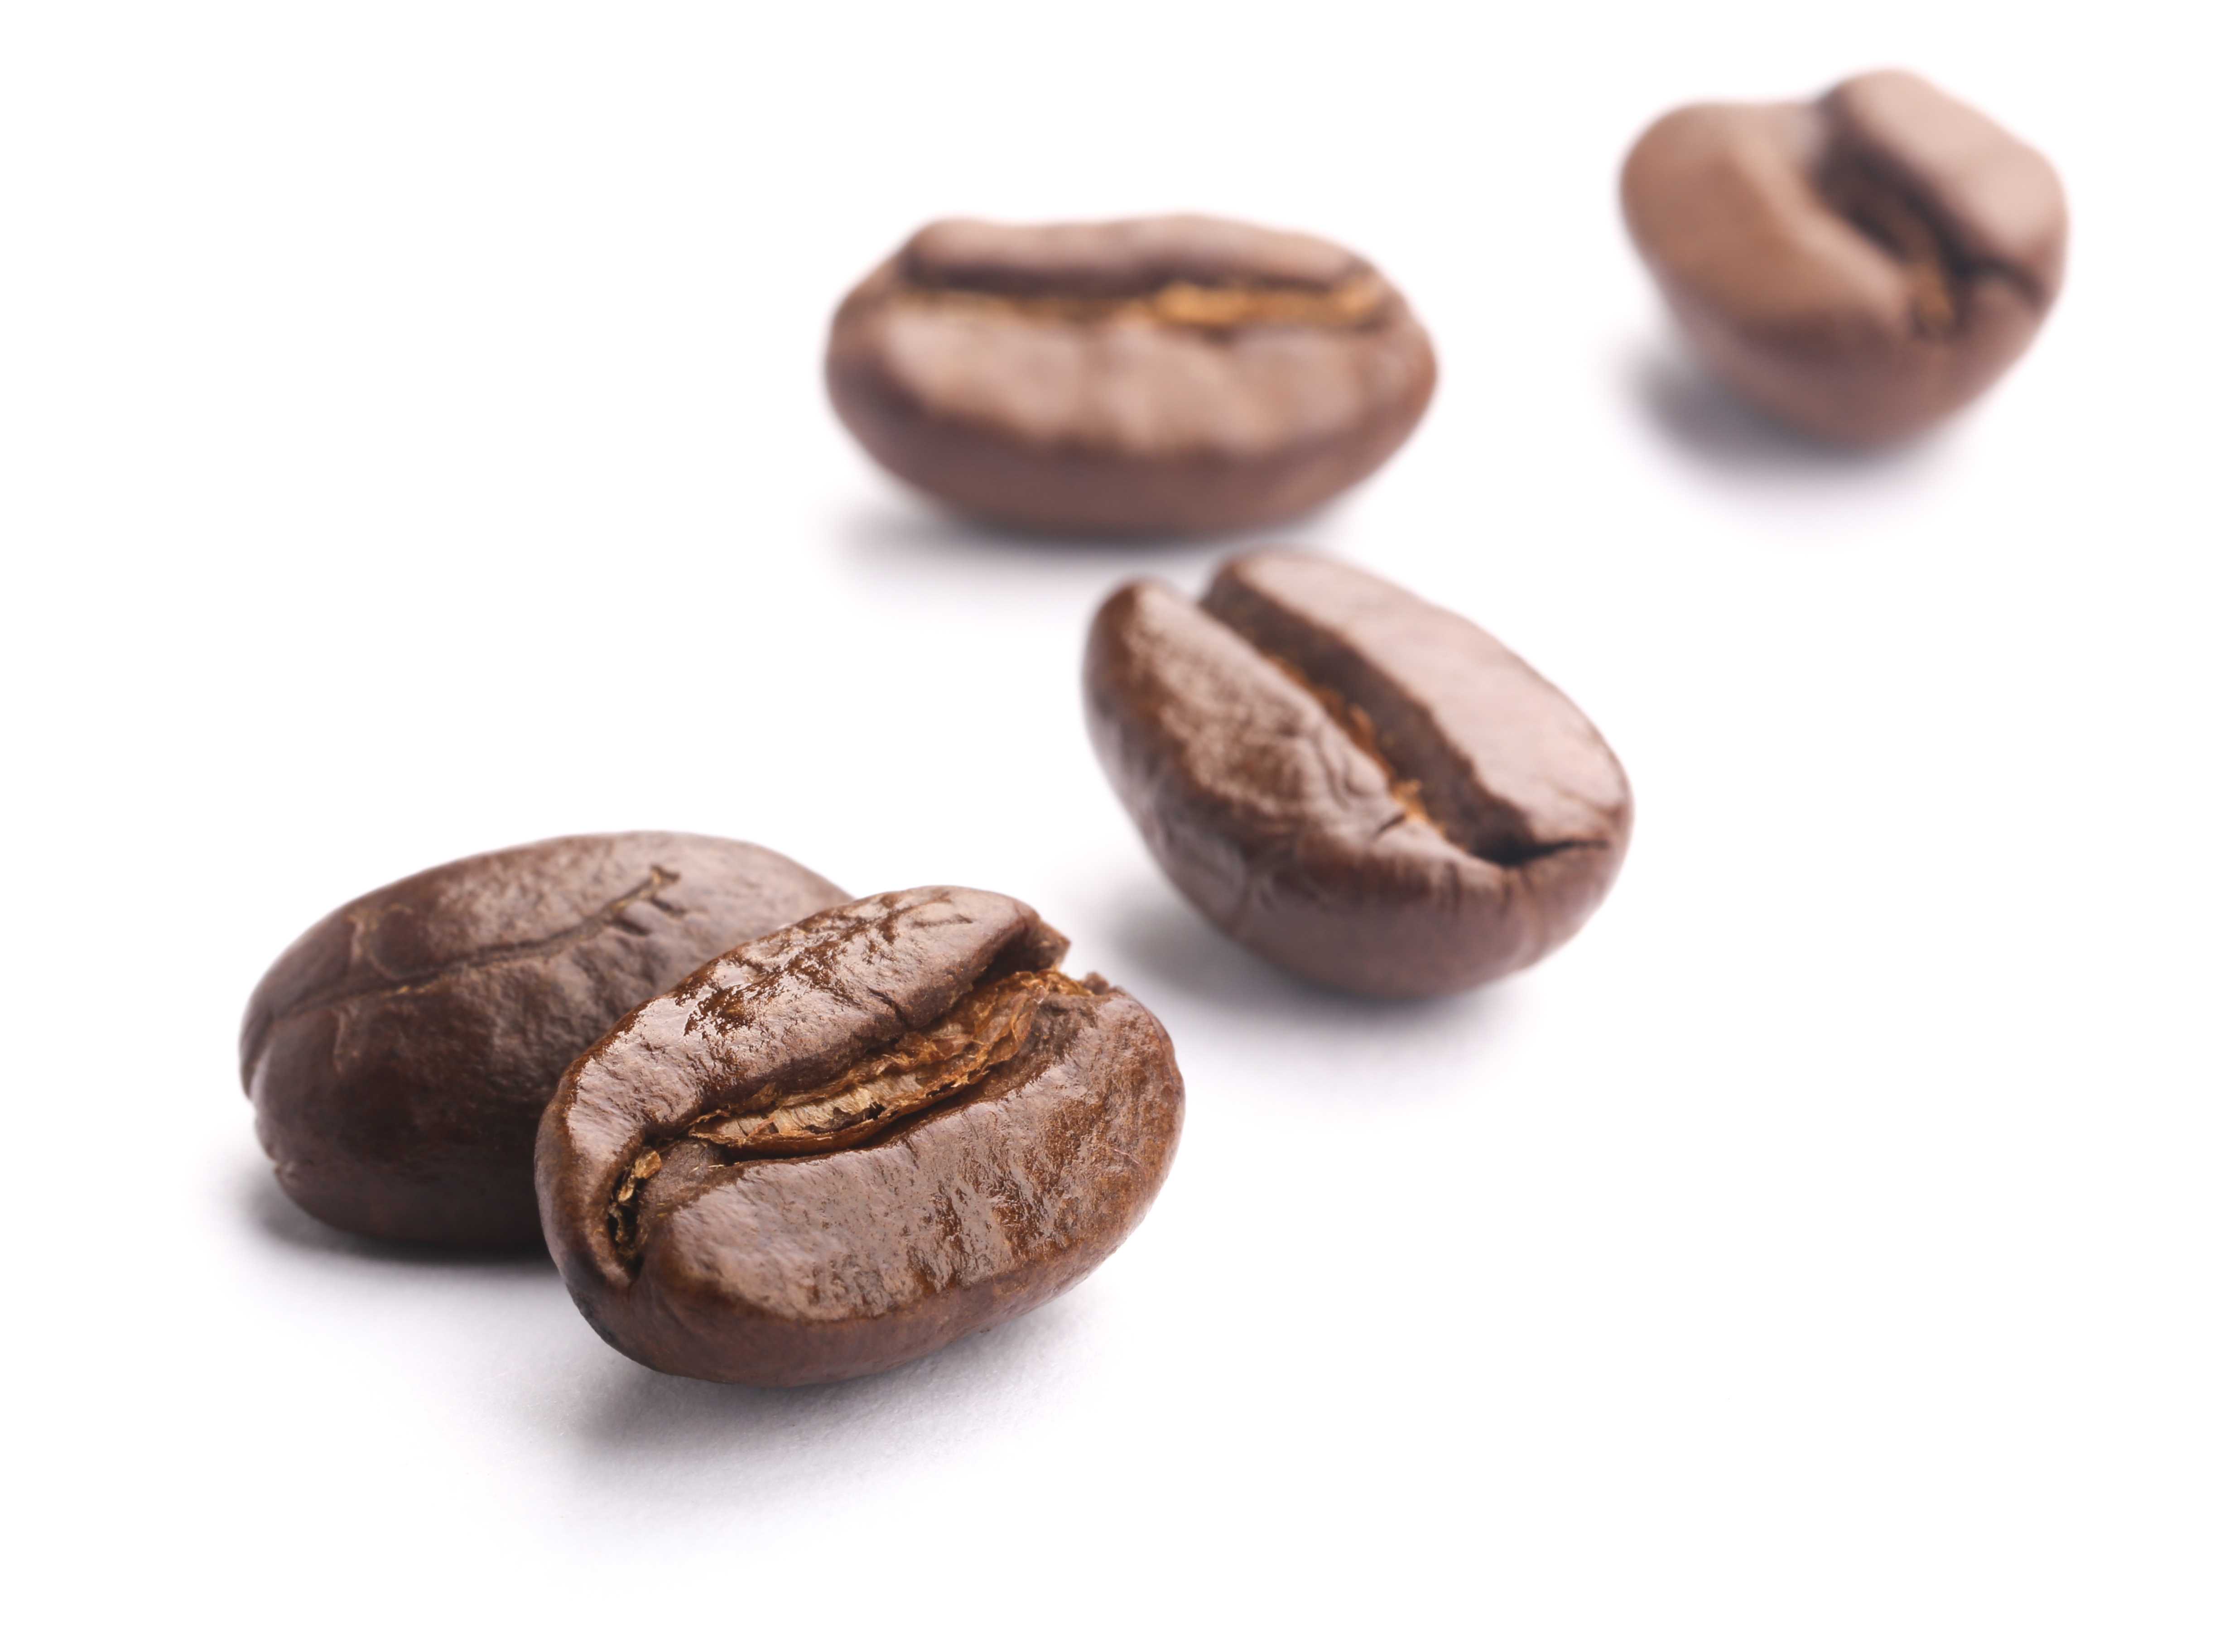 A coffee beans image